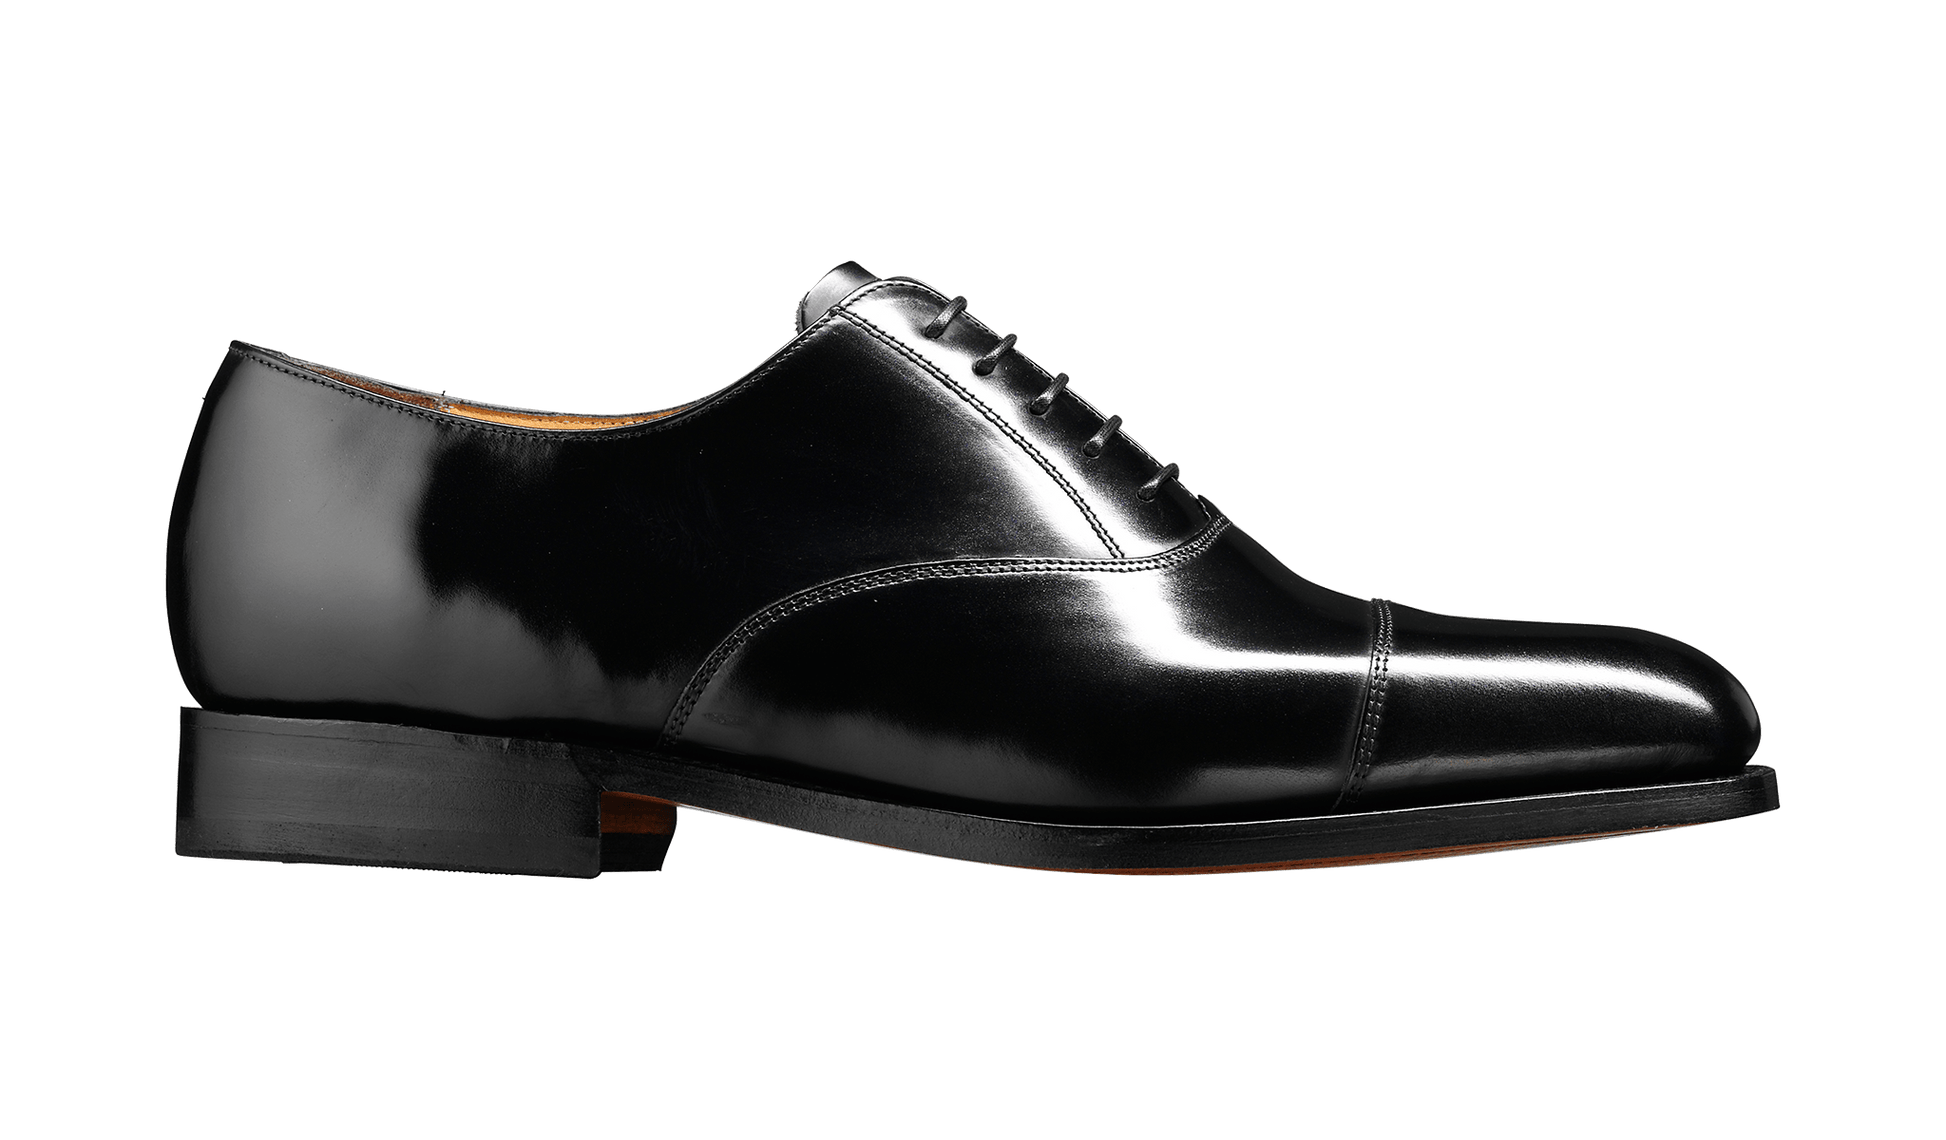 Barker Men's Arnold Leather Oxford Shoes 6644/37 - British Shoe Company